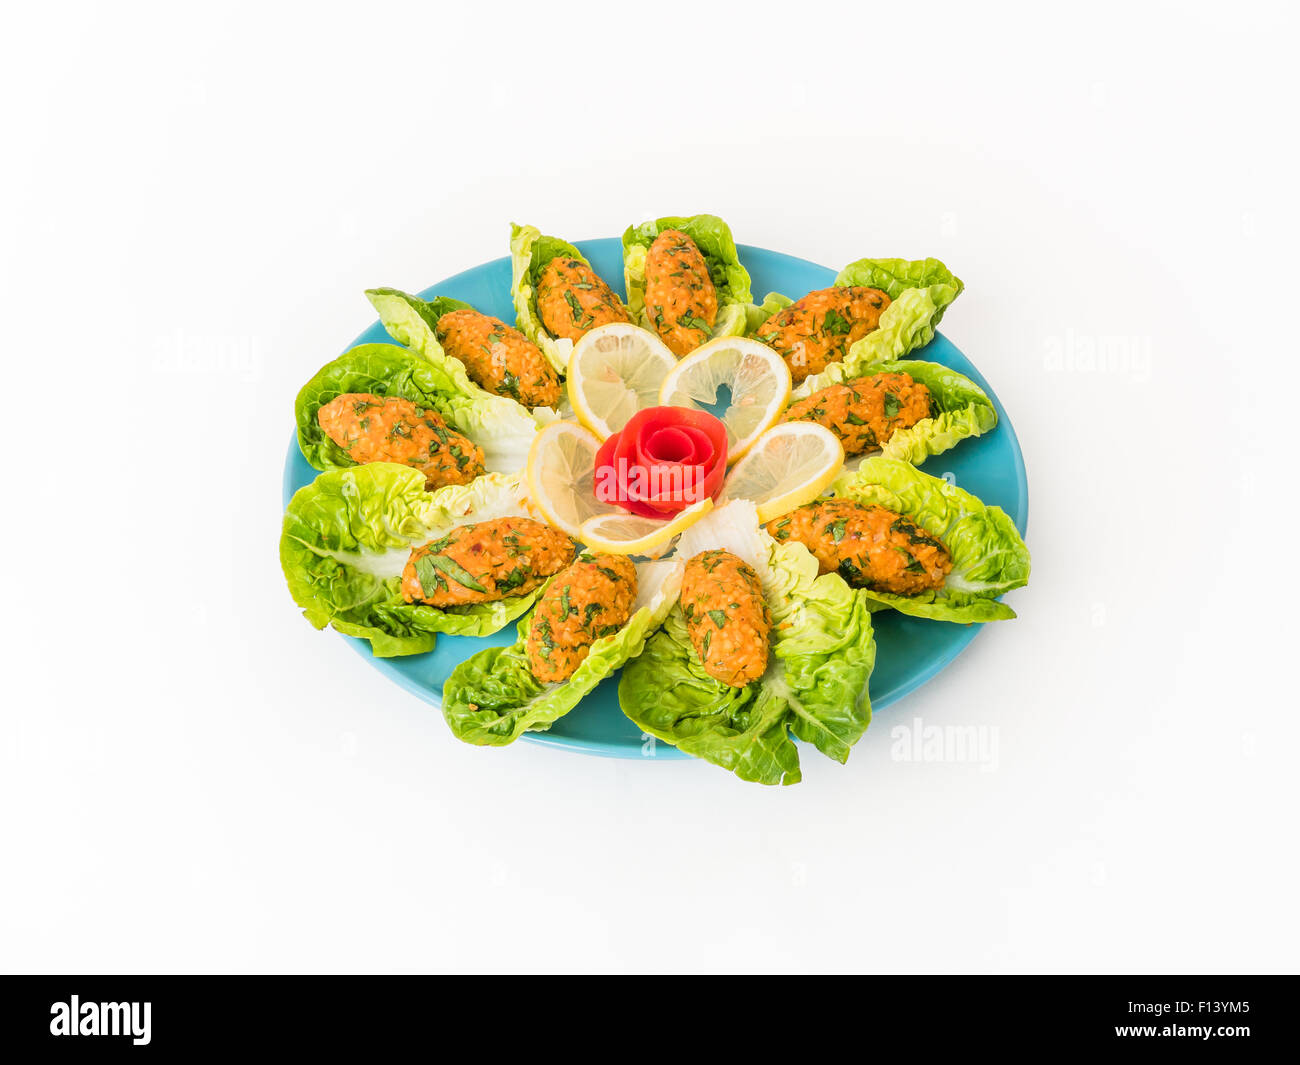 Lentil patties mediterranean mezze salad with lettuce isolated on white background Stock Photo